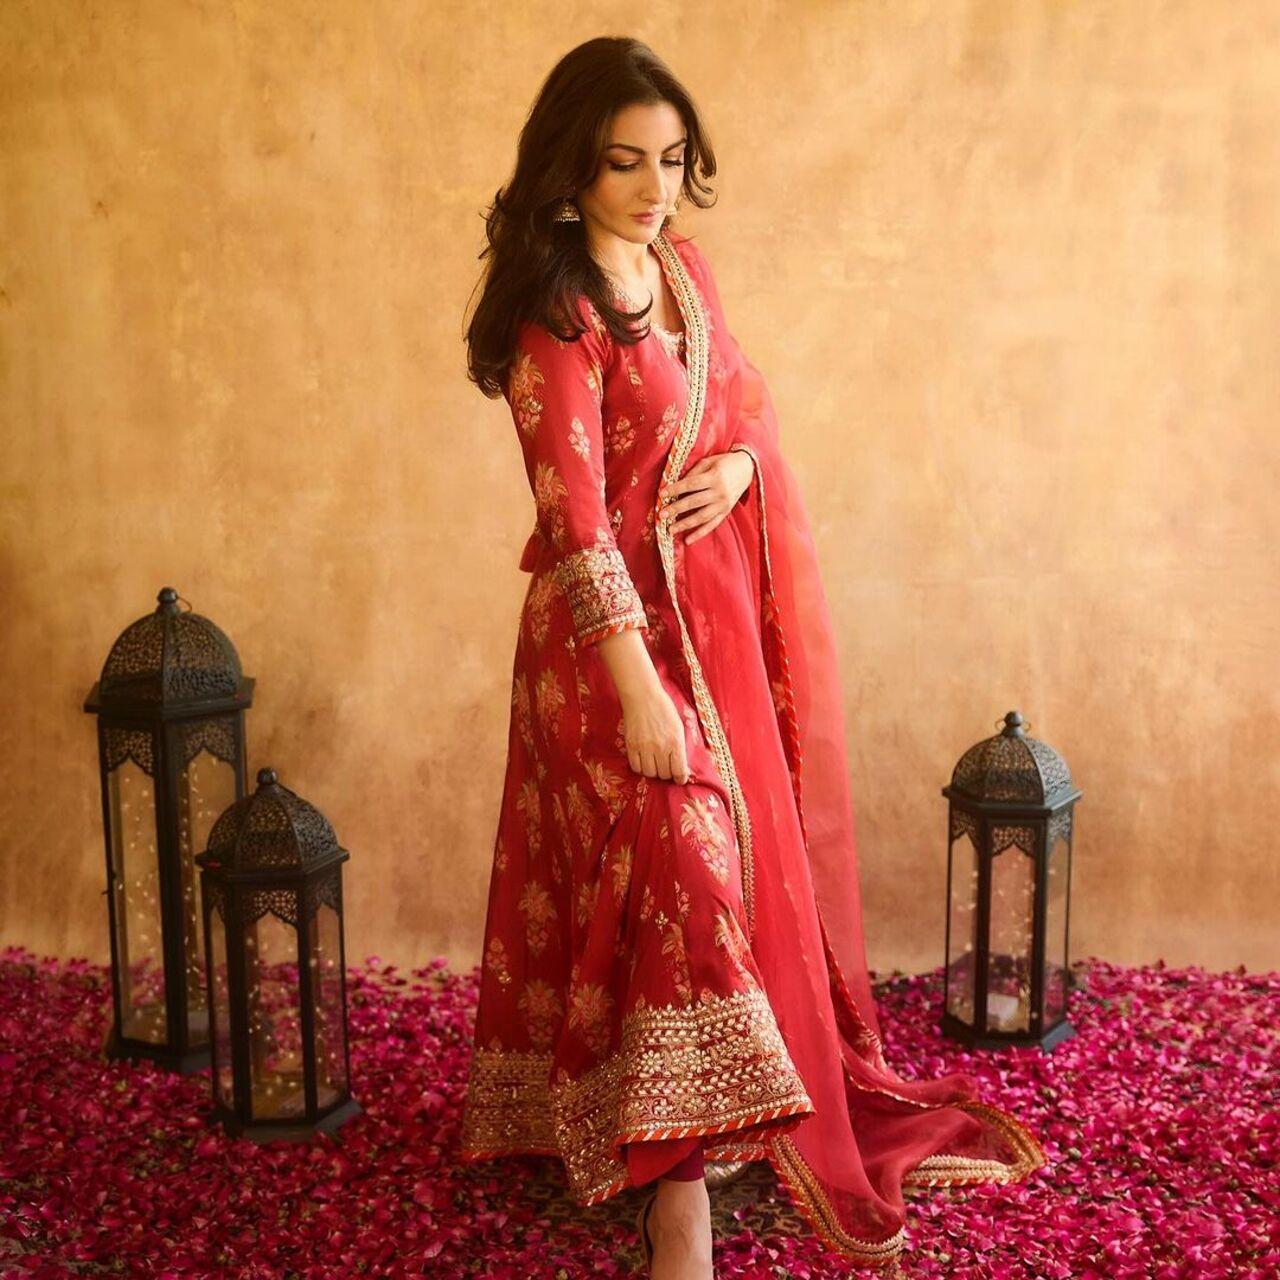 Soha Ali Khan shared pictures of herself dressed ina  red suit while wishing her followers on Eid